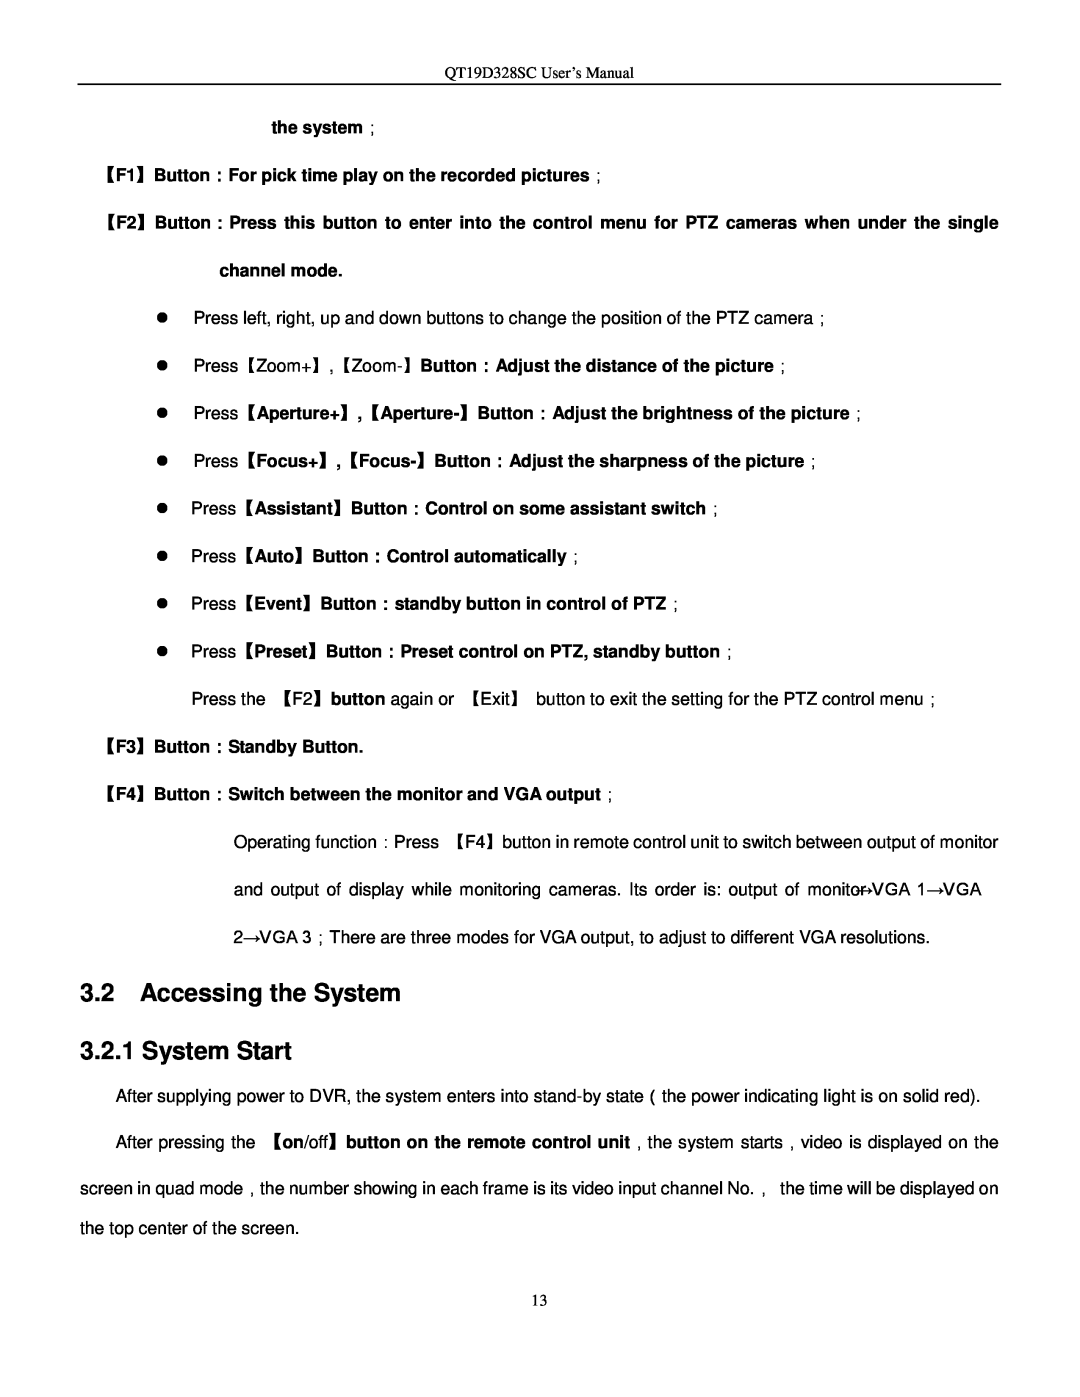 Q-See QT17D324SC user manual Accessing the System 3.2.1 System Start 